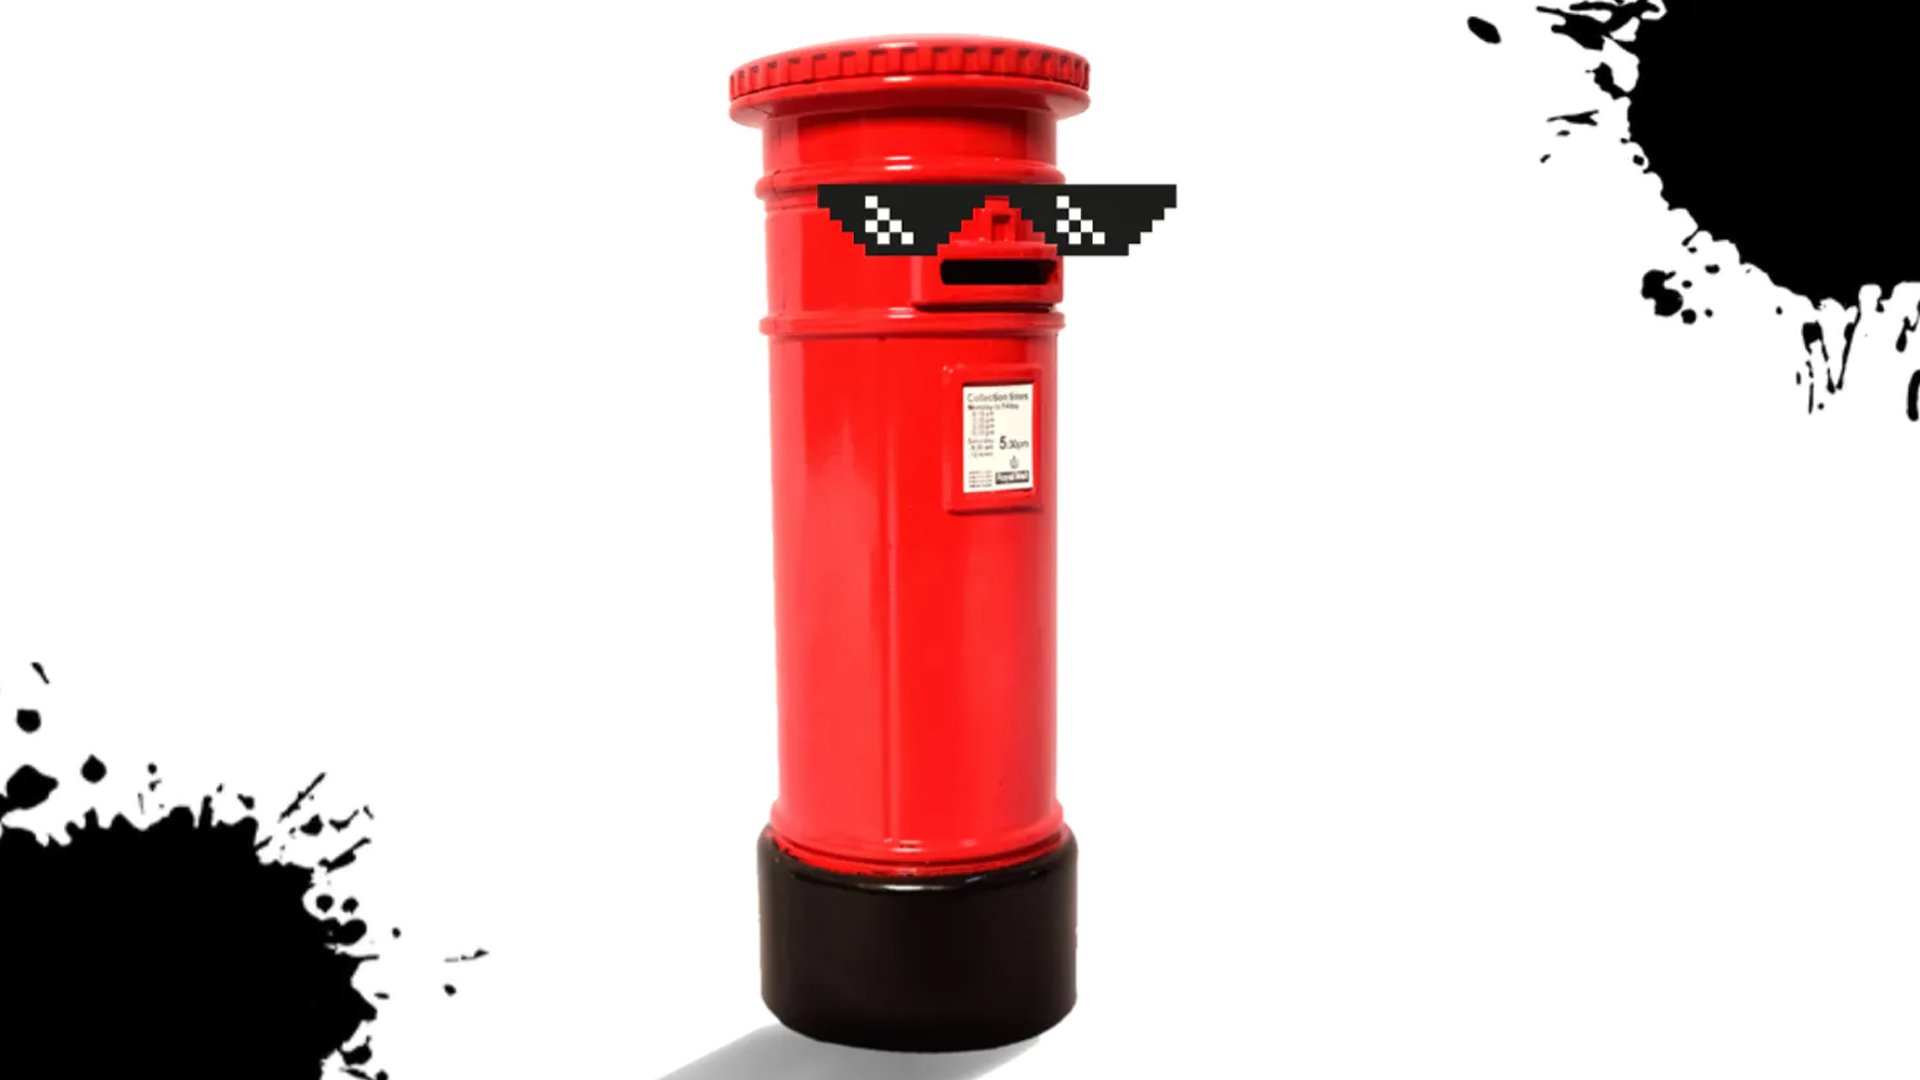 A cool looking postbox